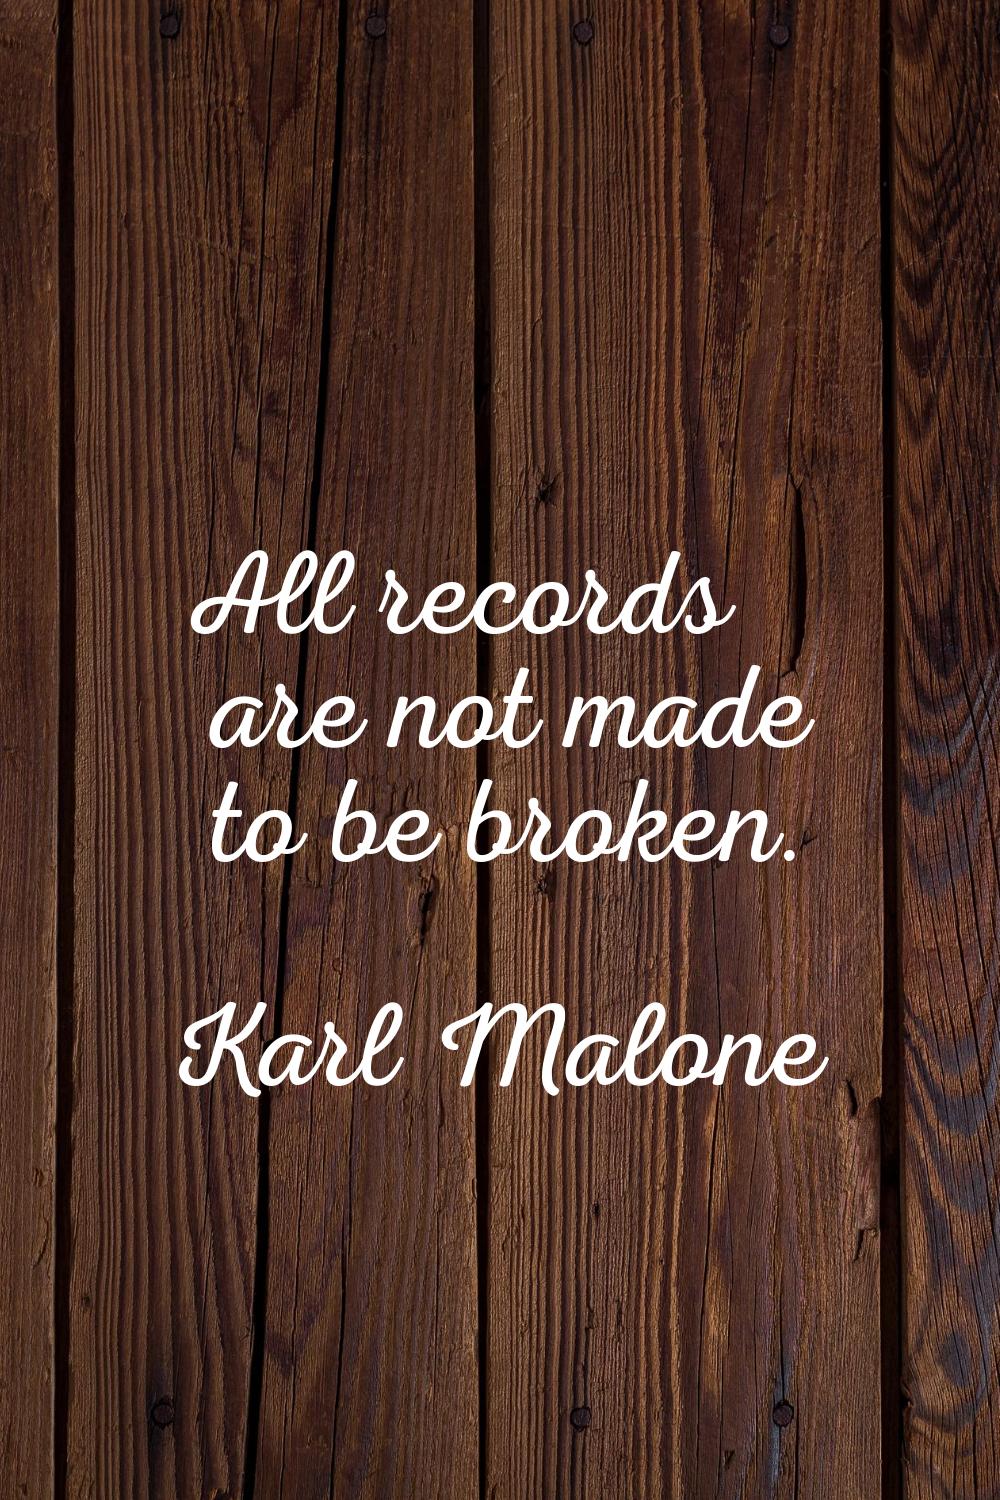 All records are not made to be broken.